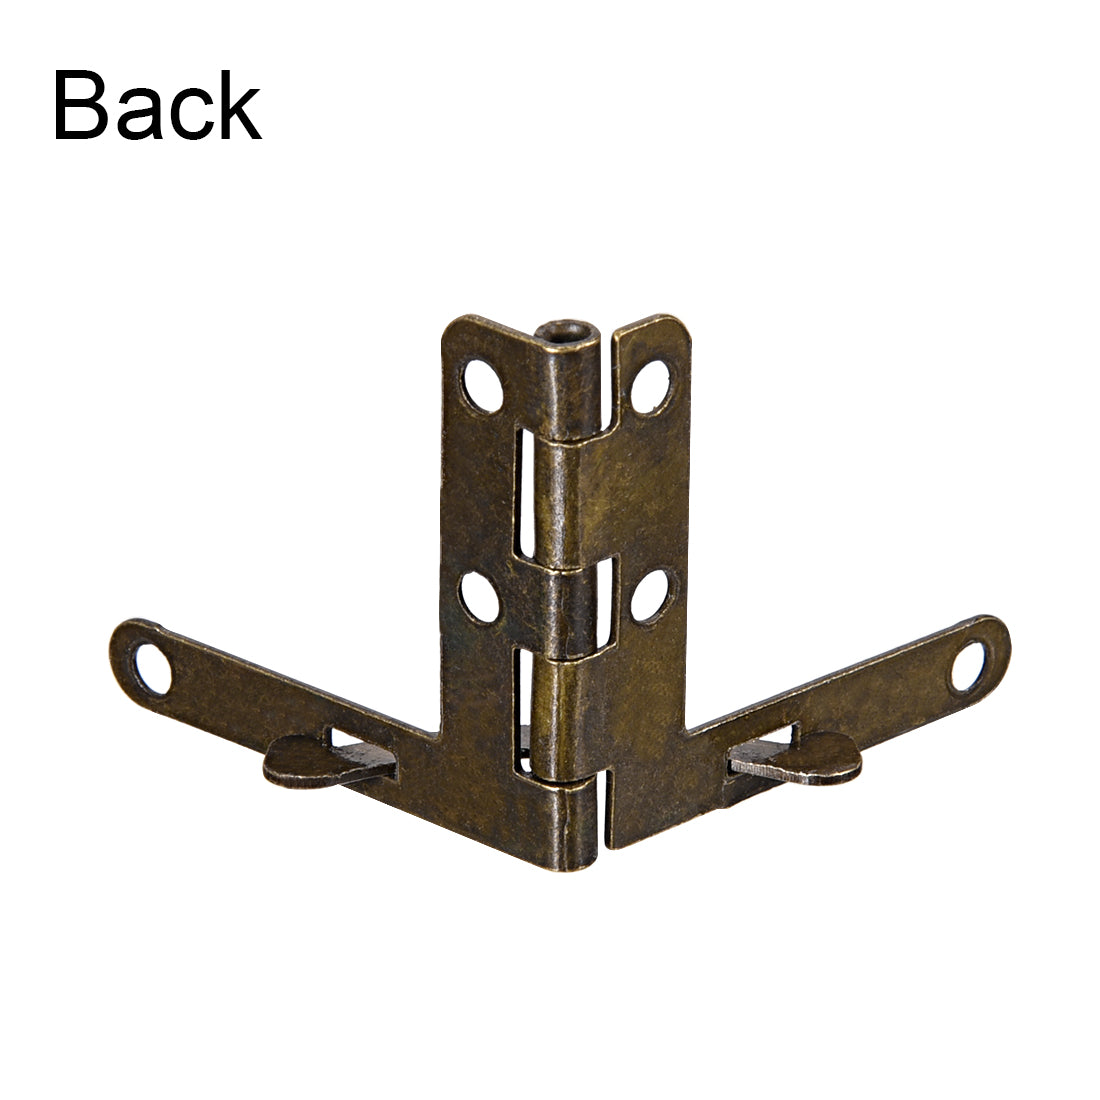 uxcell Uxcell Concealable Quadrant Hinge 33mmx30mm Foldable Bronze Tone 13pcs